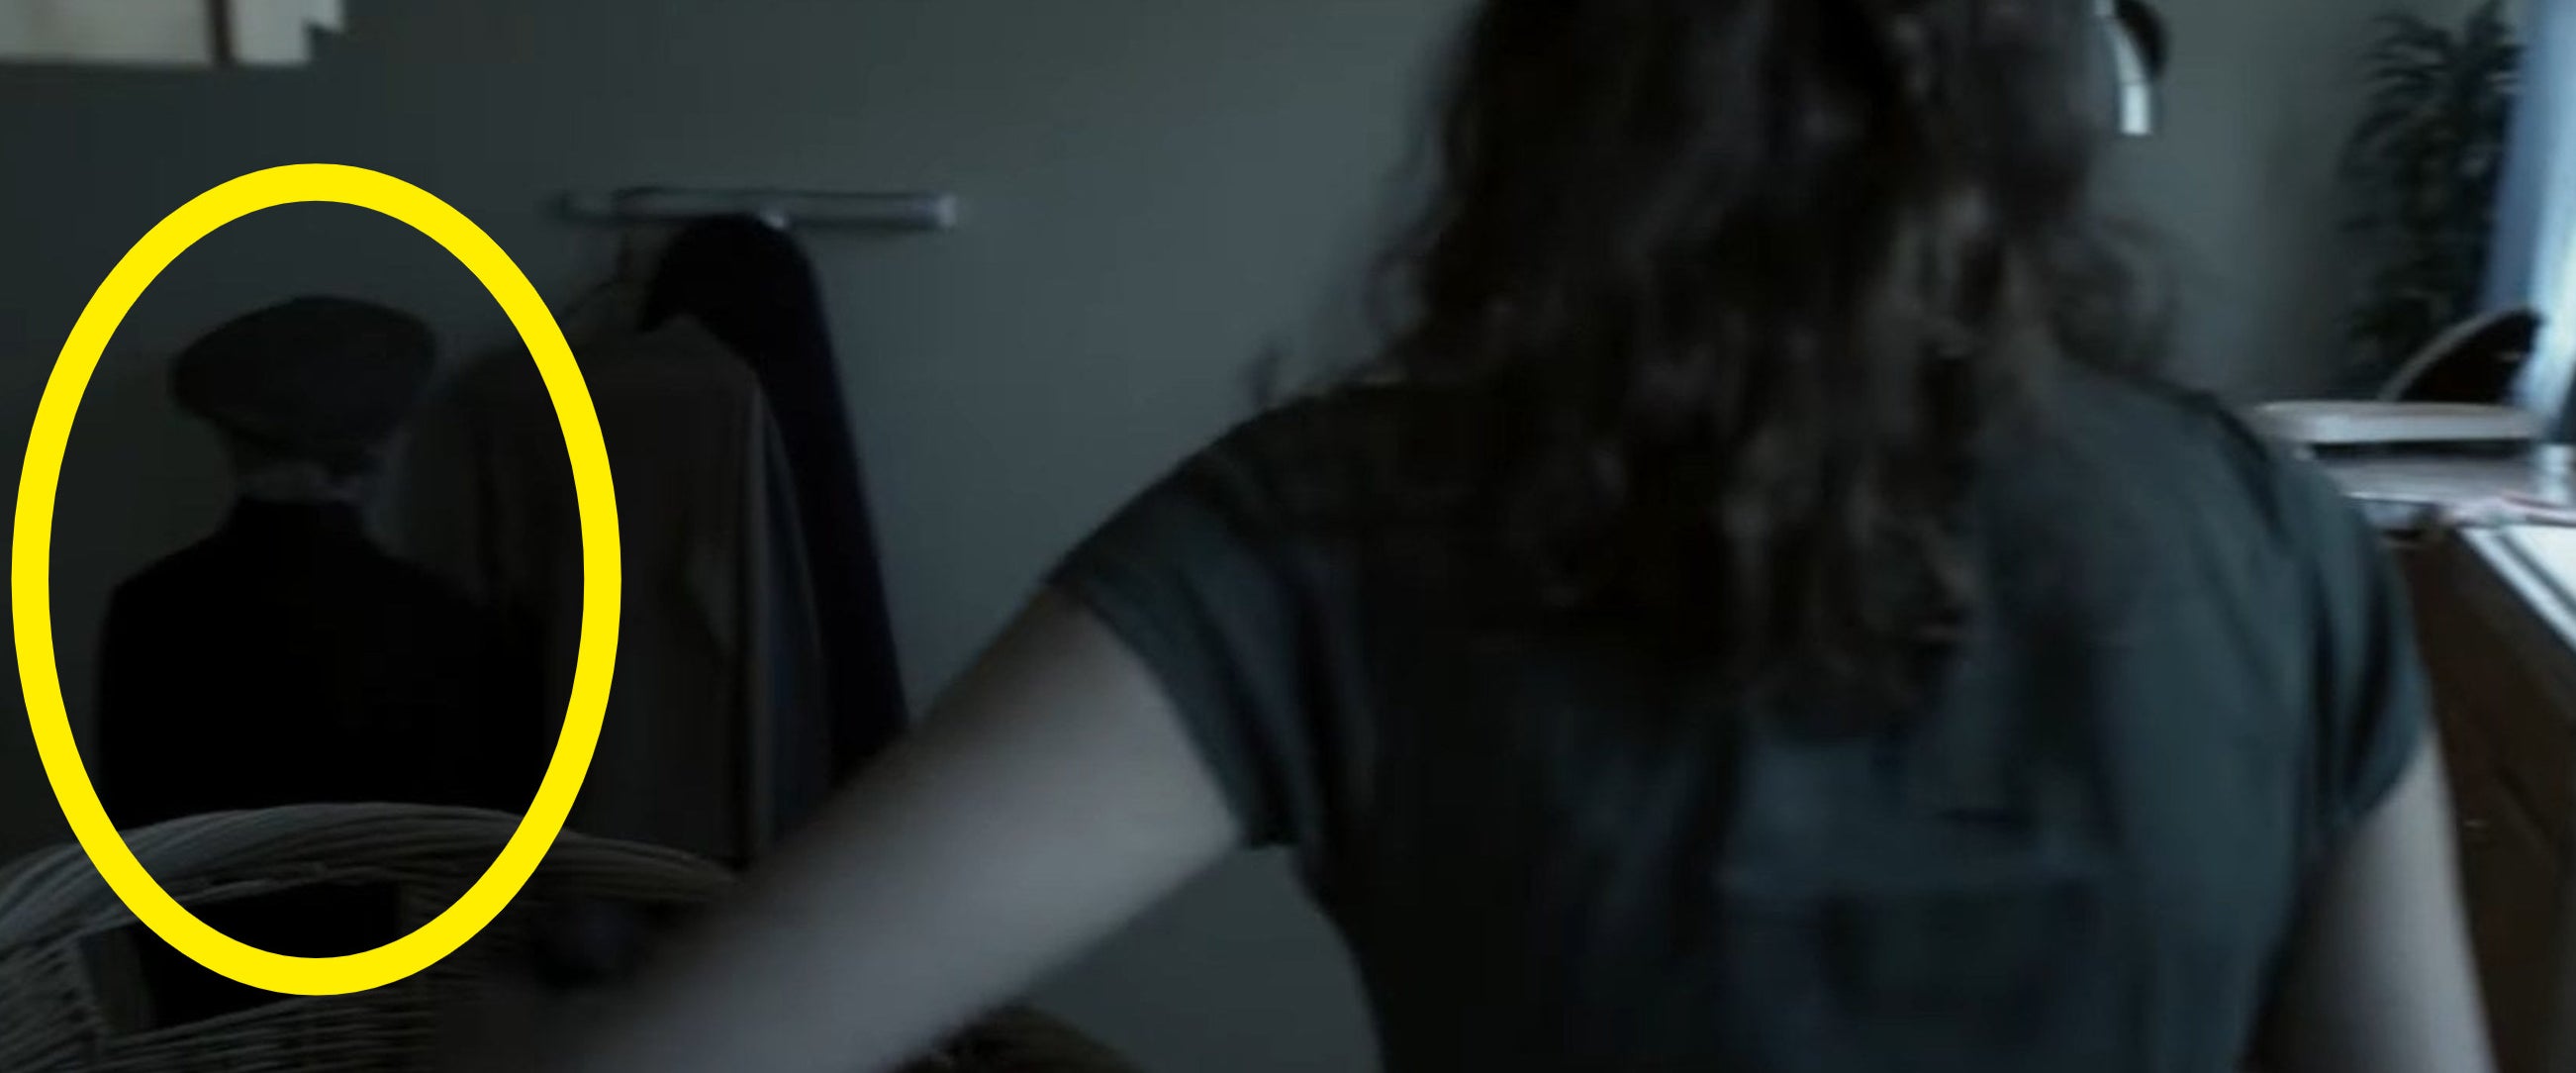 Renai putting laundry into a basket in &quot;Insidious&quot;